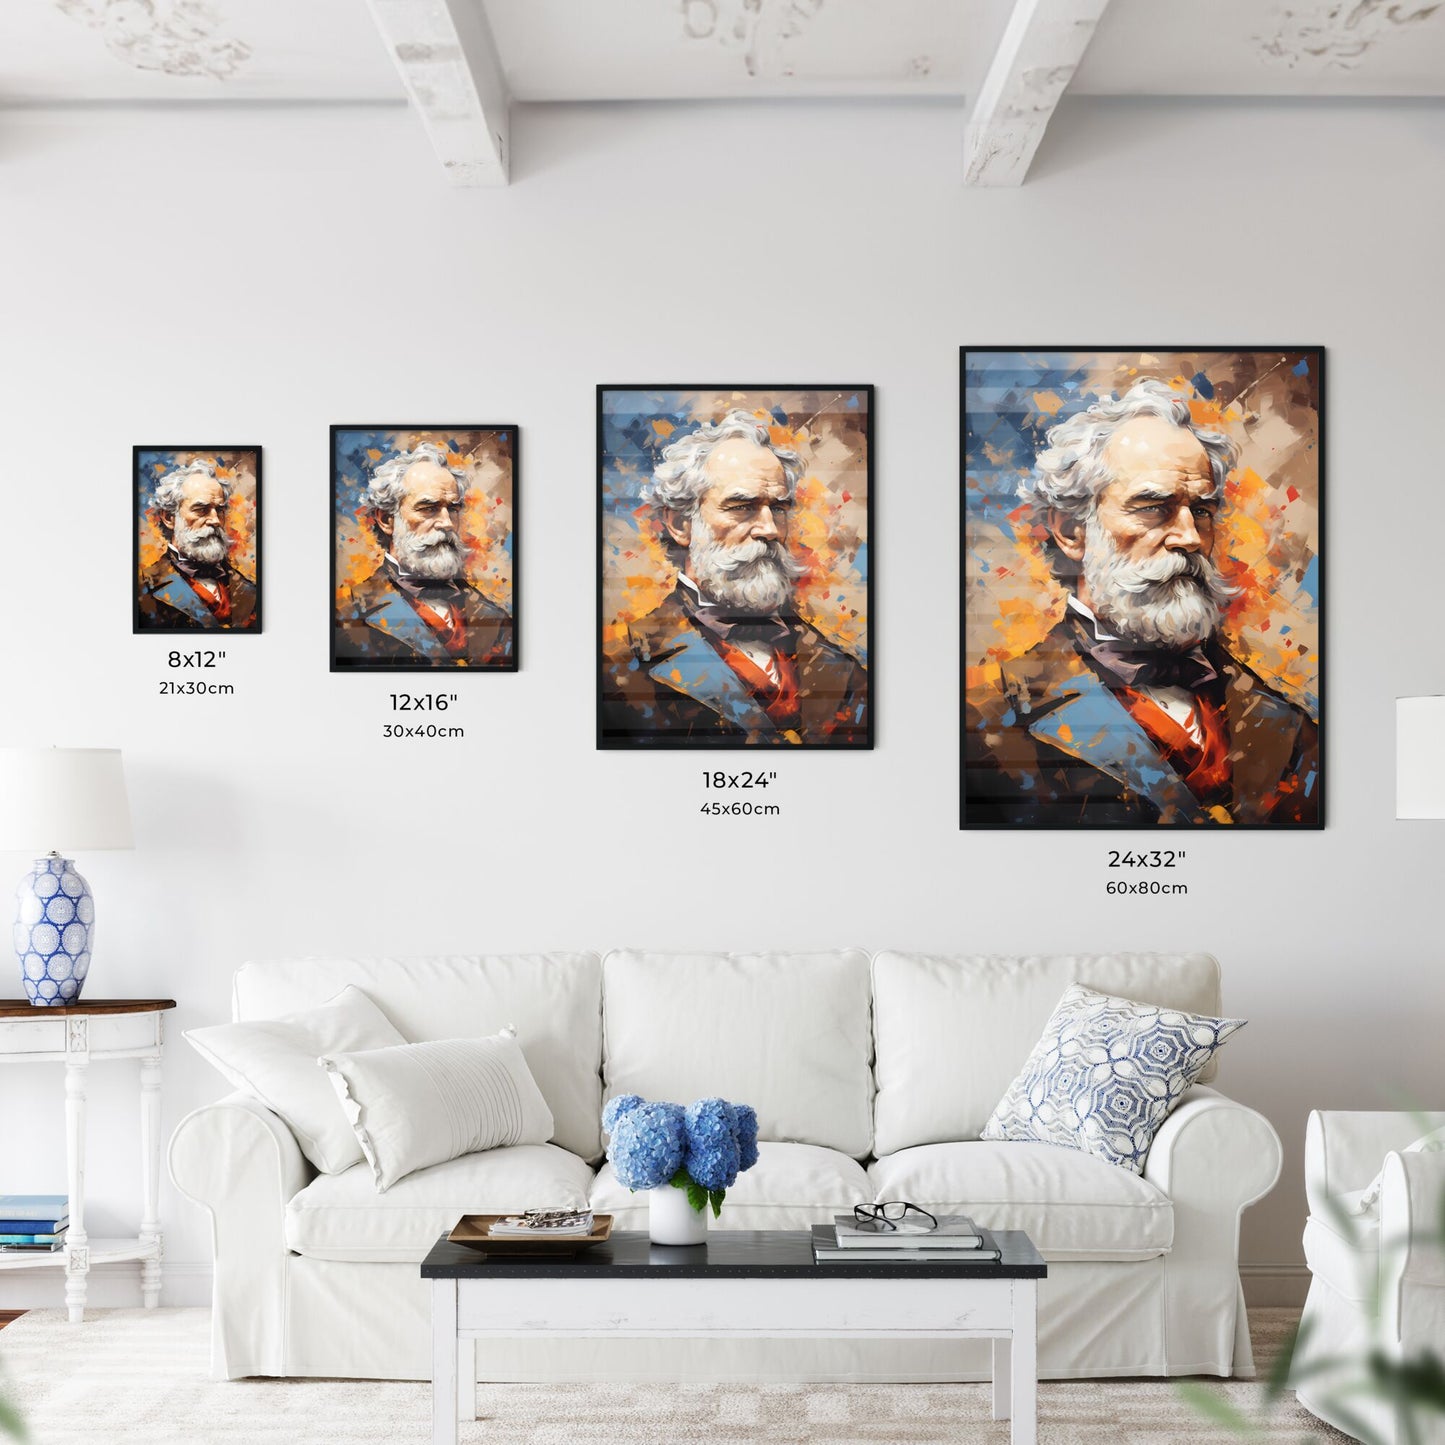 Robert E. Lee - A Painting Of A Man With A White Beard Default Title